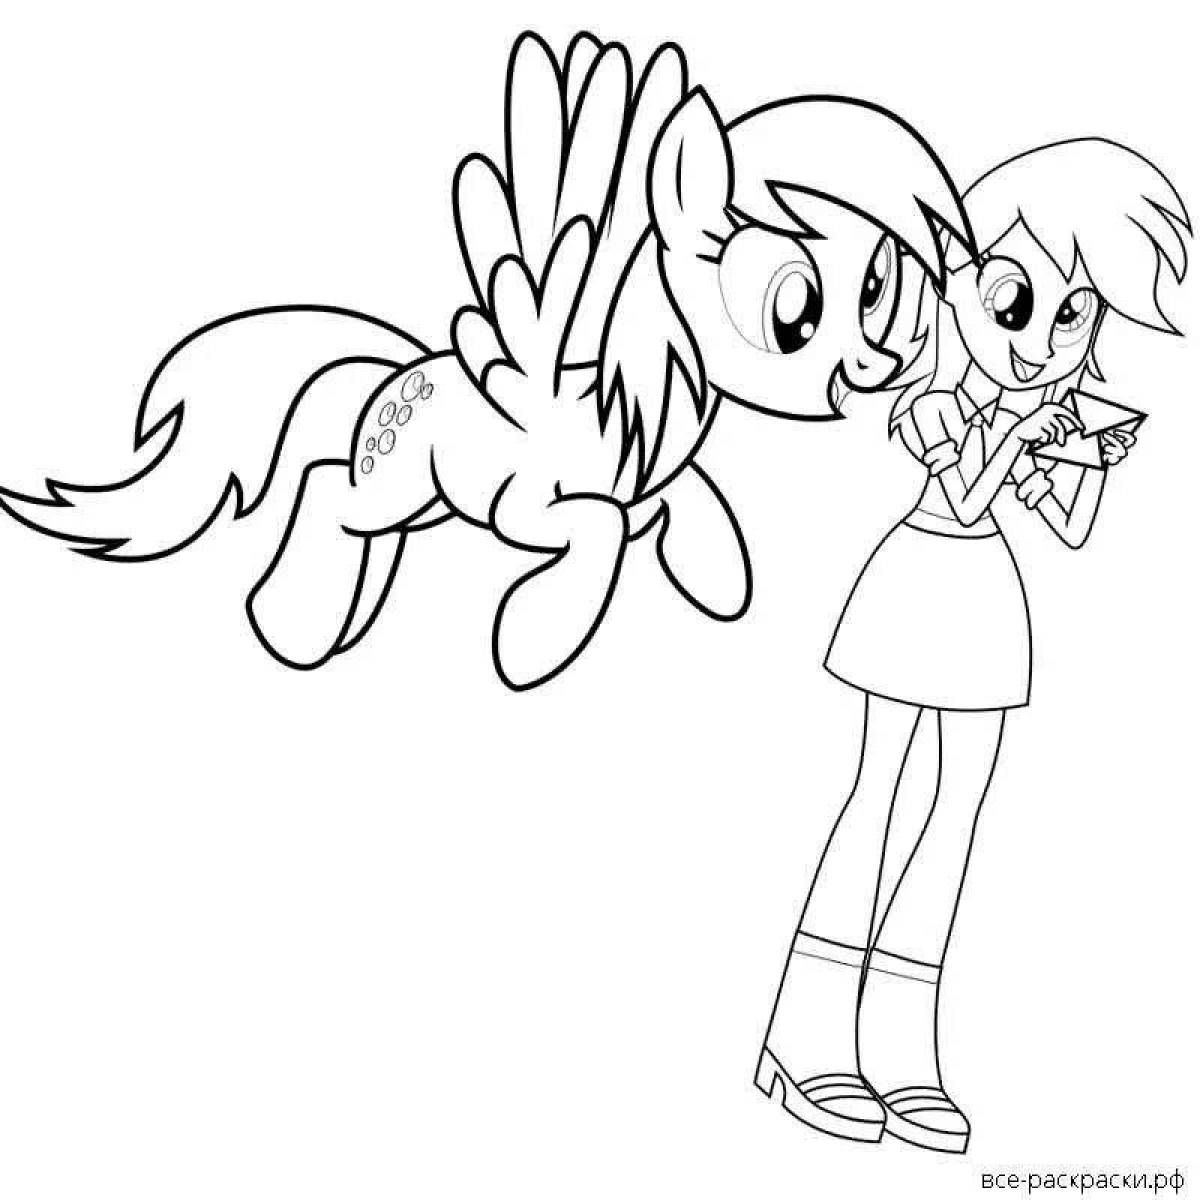 Coloring book funny pony playtime